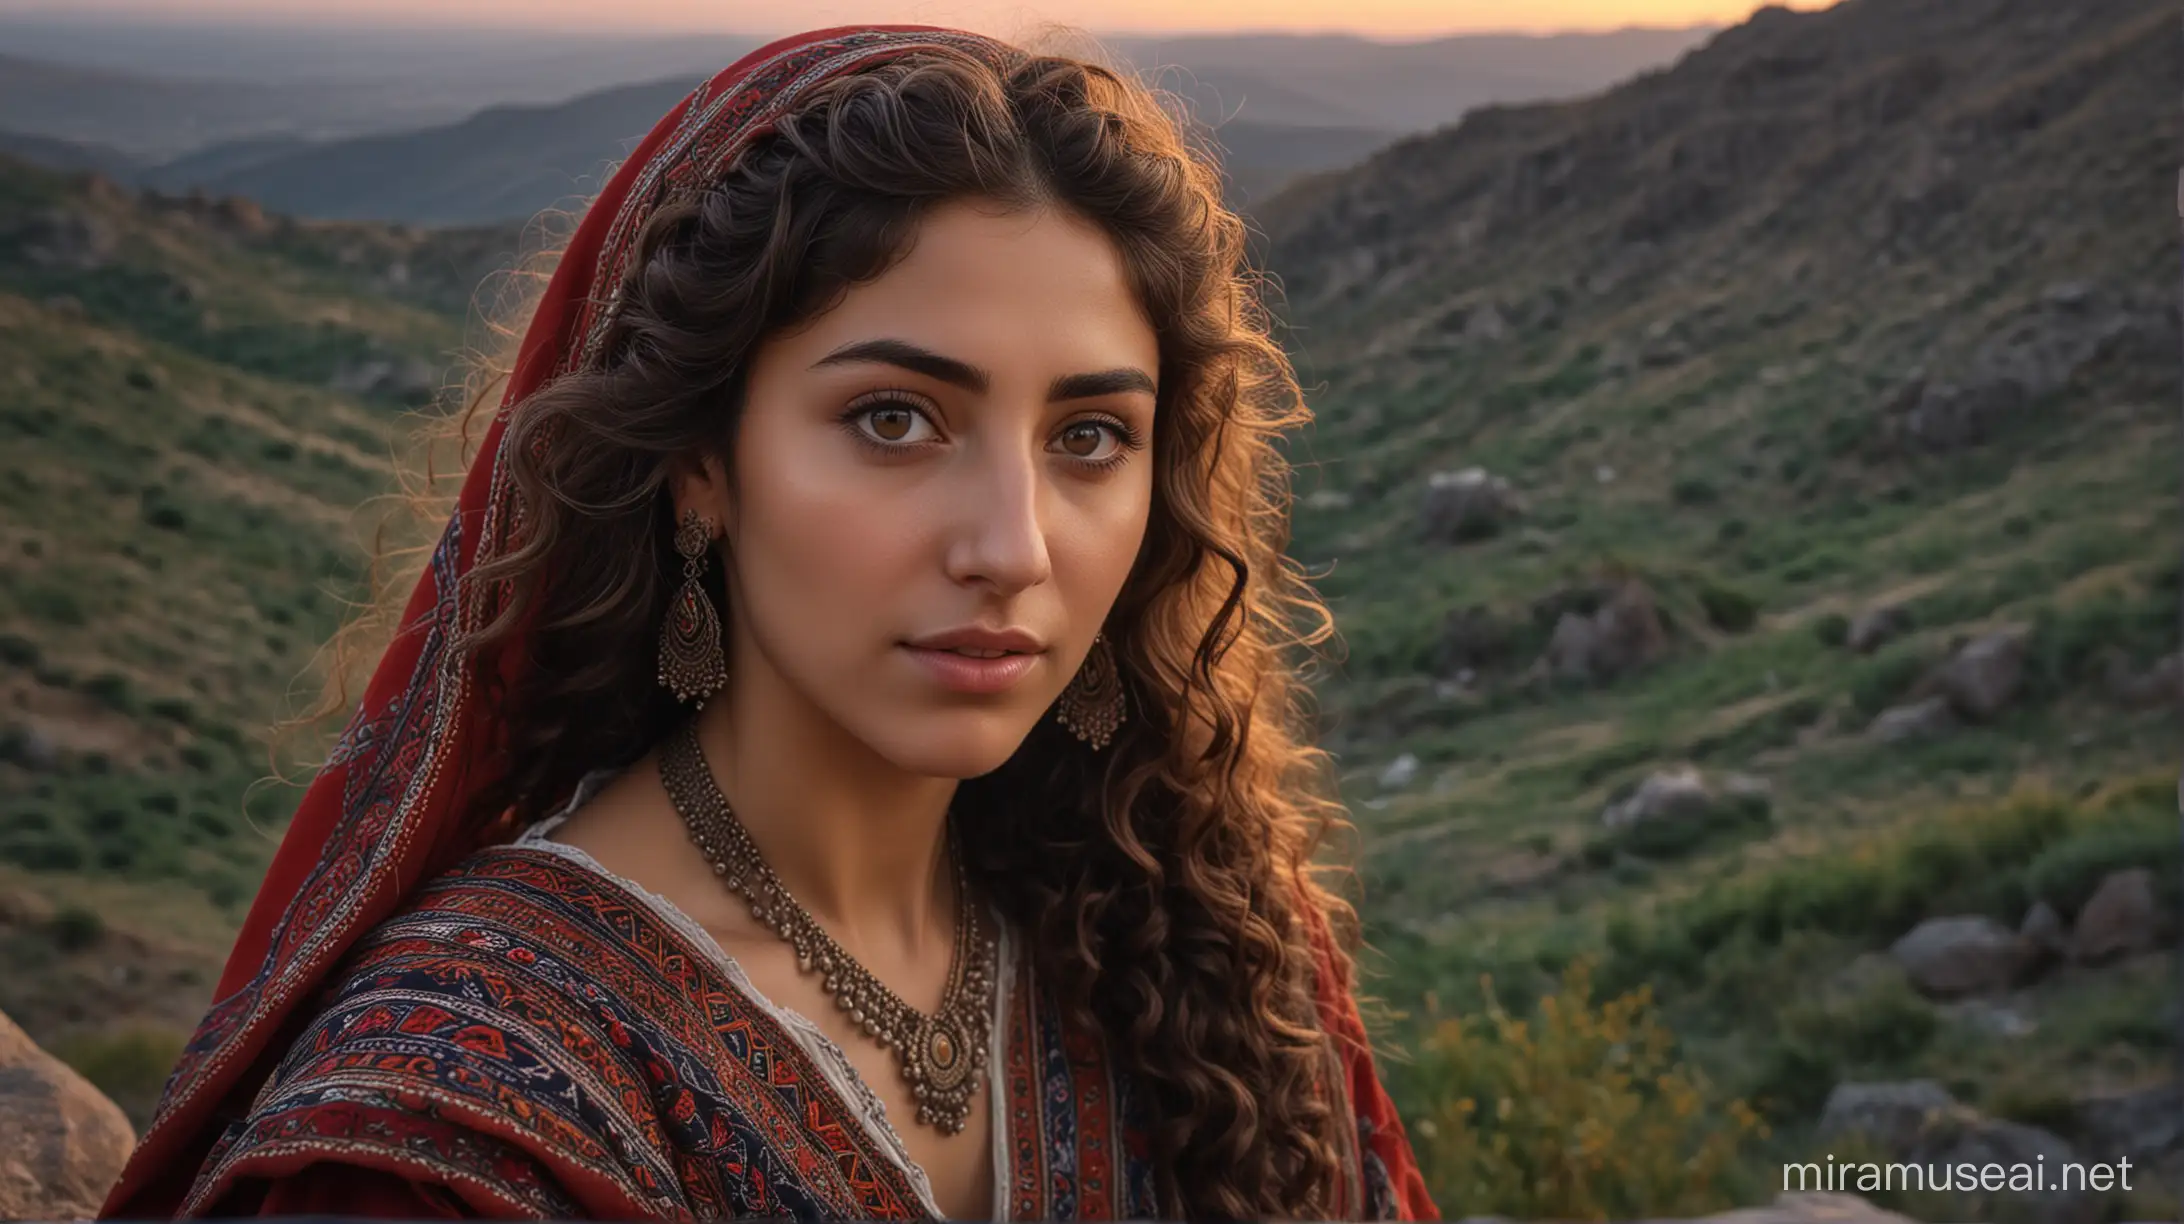 Armenian Woman in Traditional Attire at Sunset Mountainside